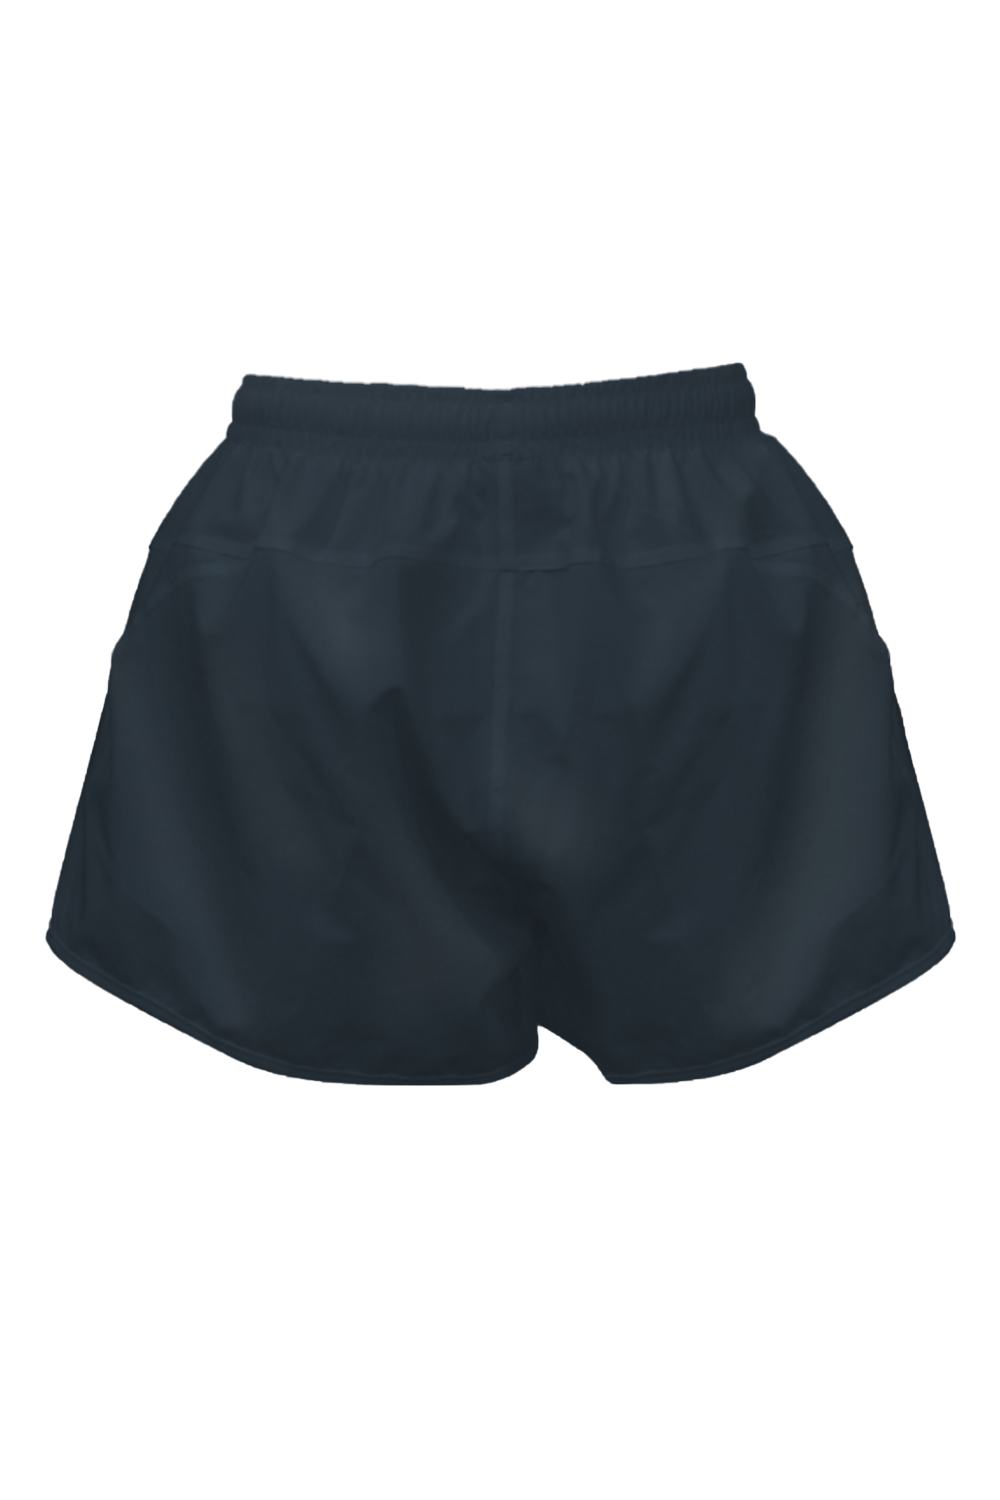 Racer Shorts (Charcoal)